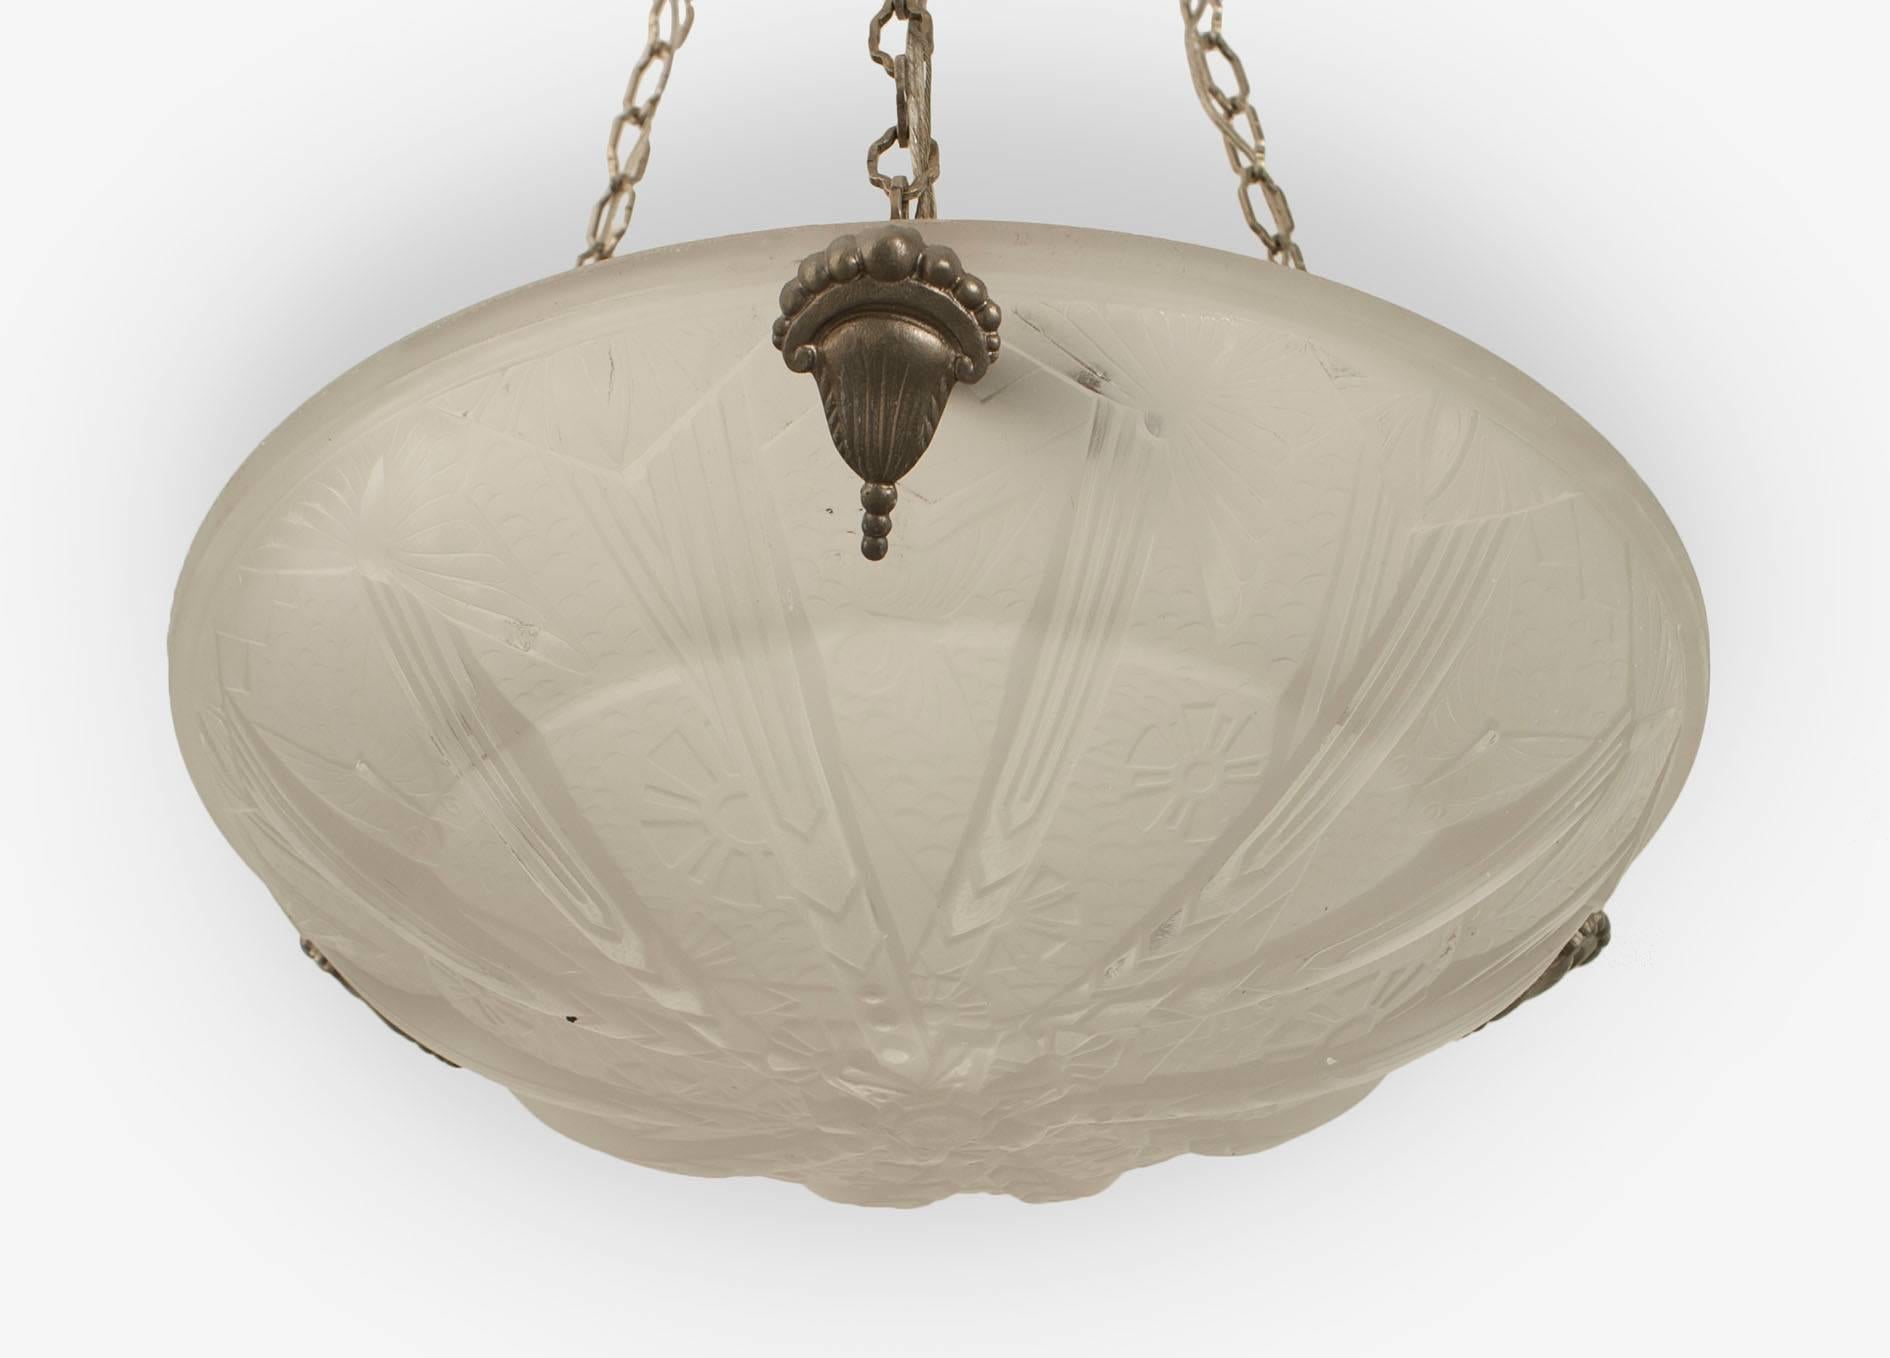 French Art Deco (circa 1925) round pendant form frosted glass chandelier with a molded geometric design & sunburst bottom suspended by 3 chains to a canopy (signed MULLER)
